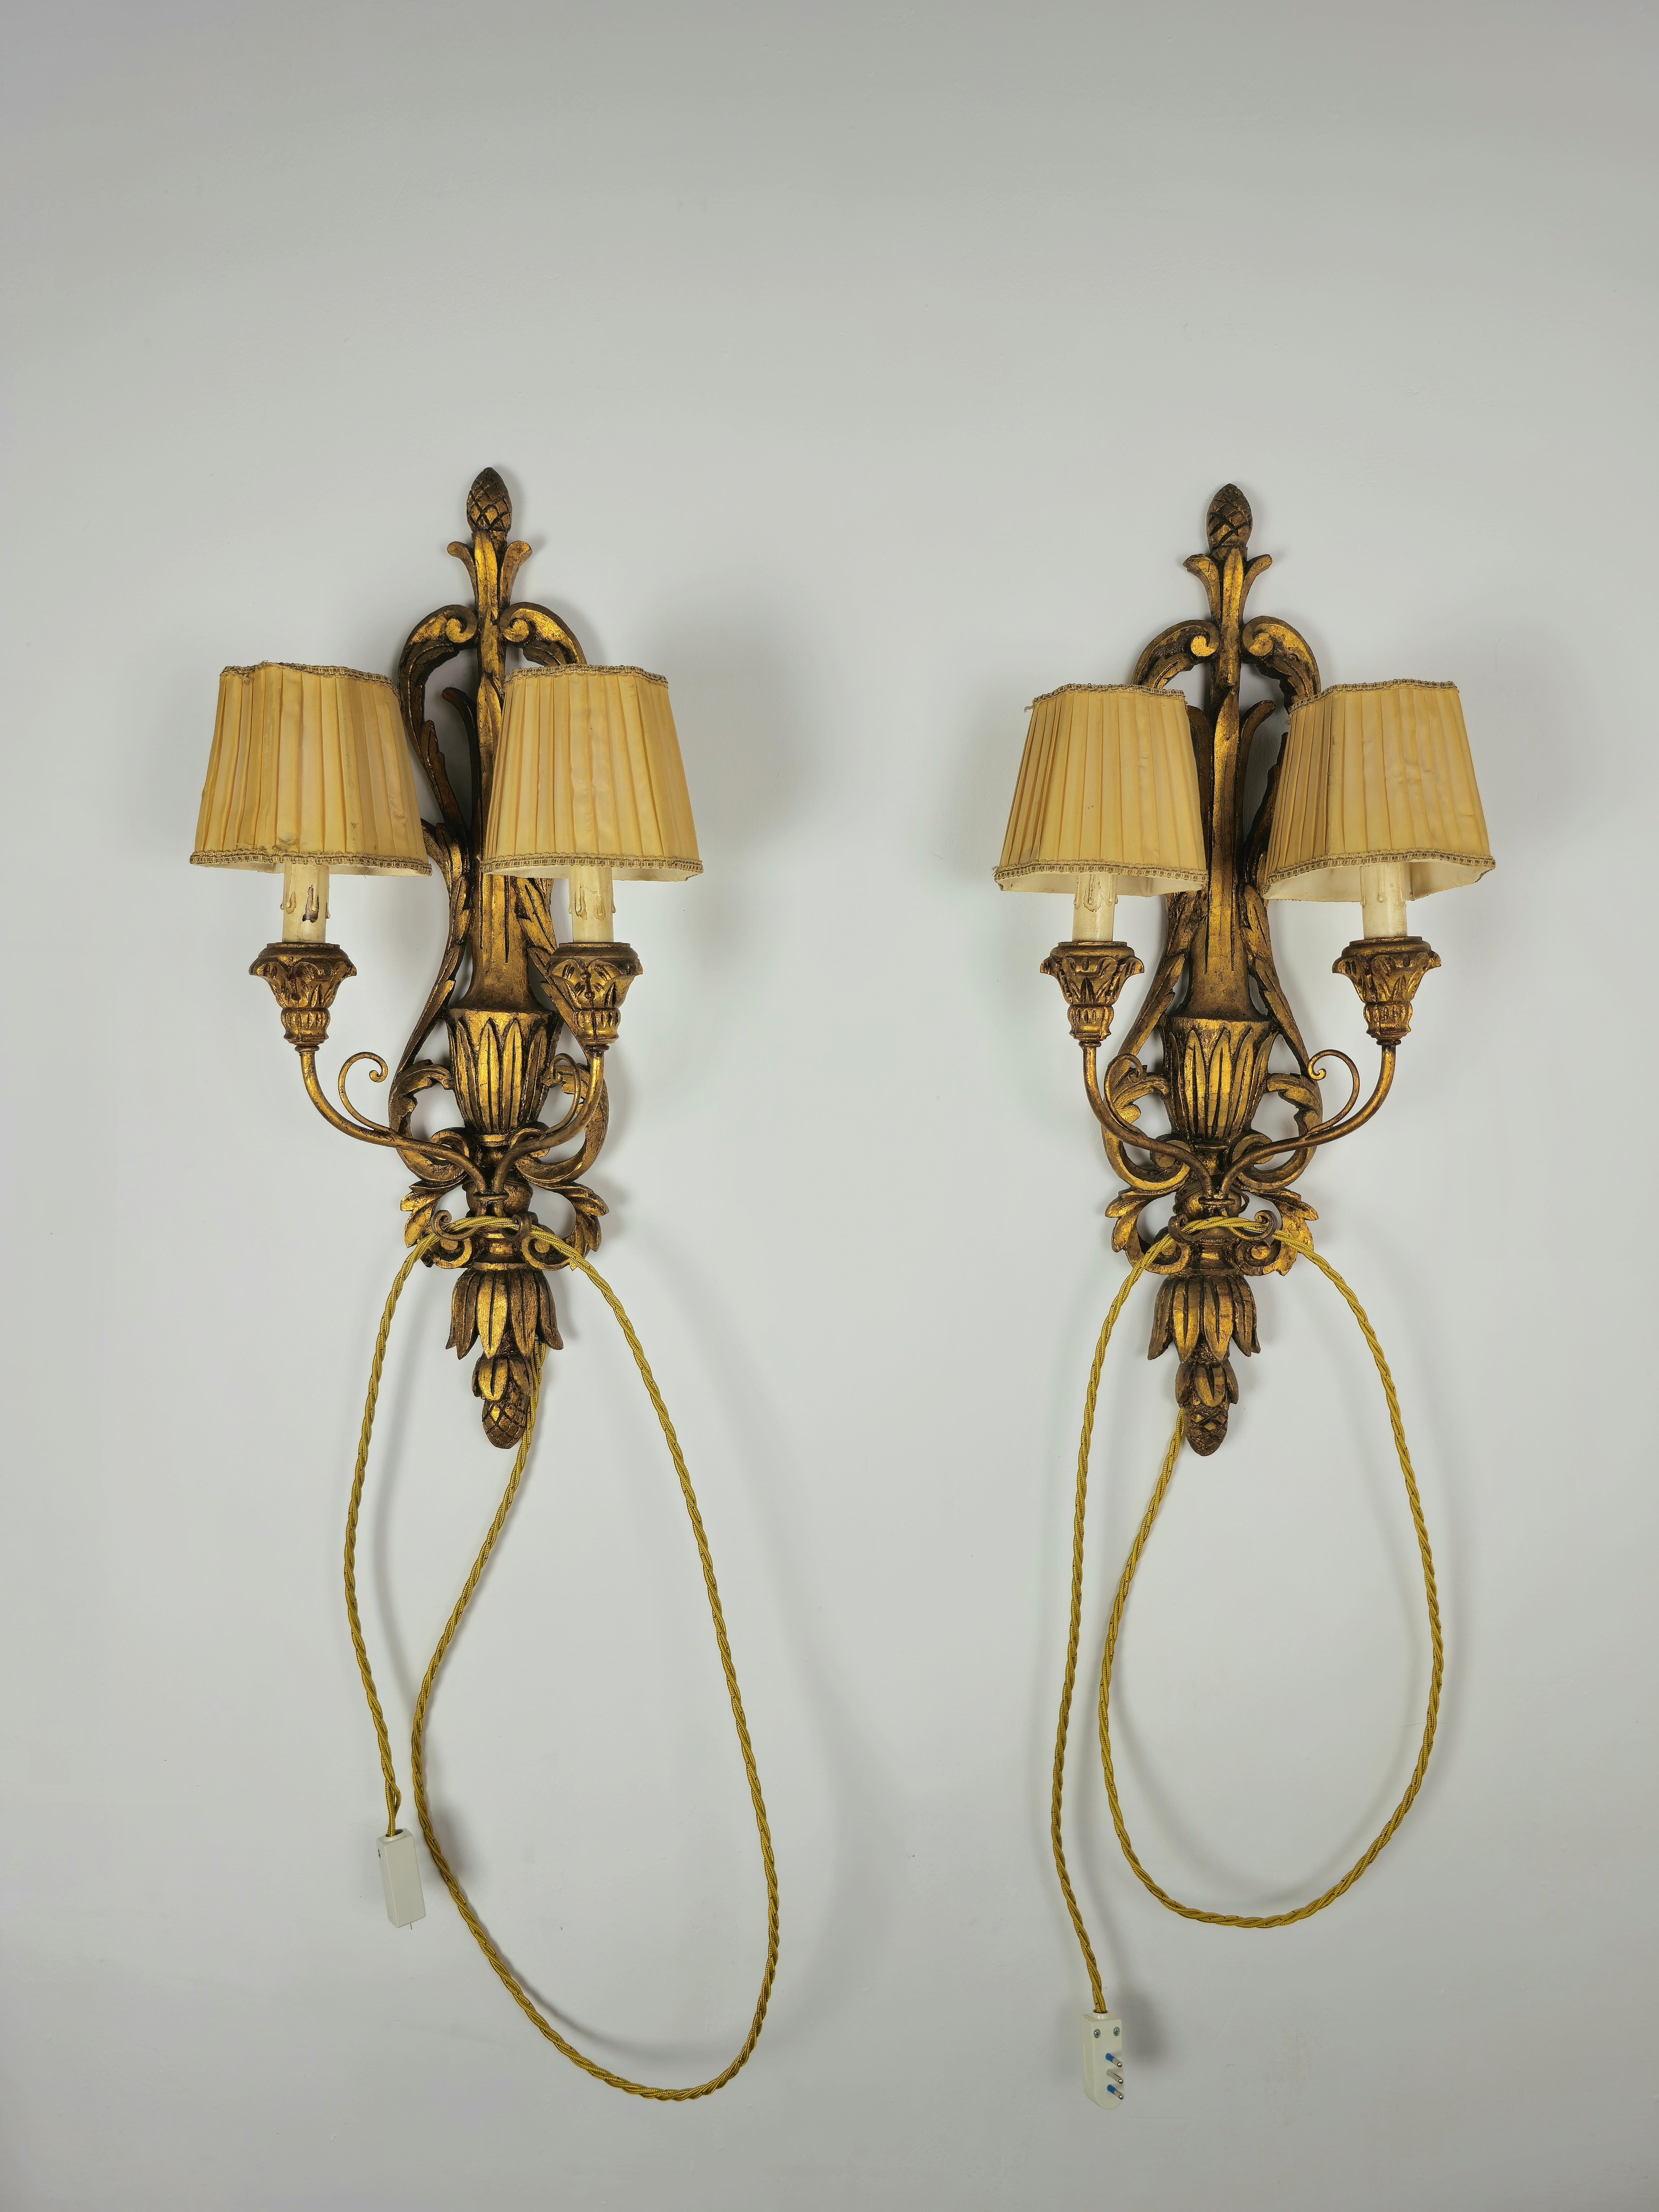 Pair of Wall Lights Sconces Wood Carved Silk Midcentury Italian Design 1950s  For Sale 8